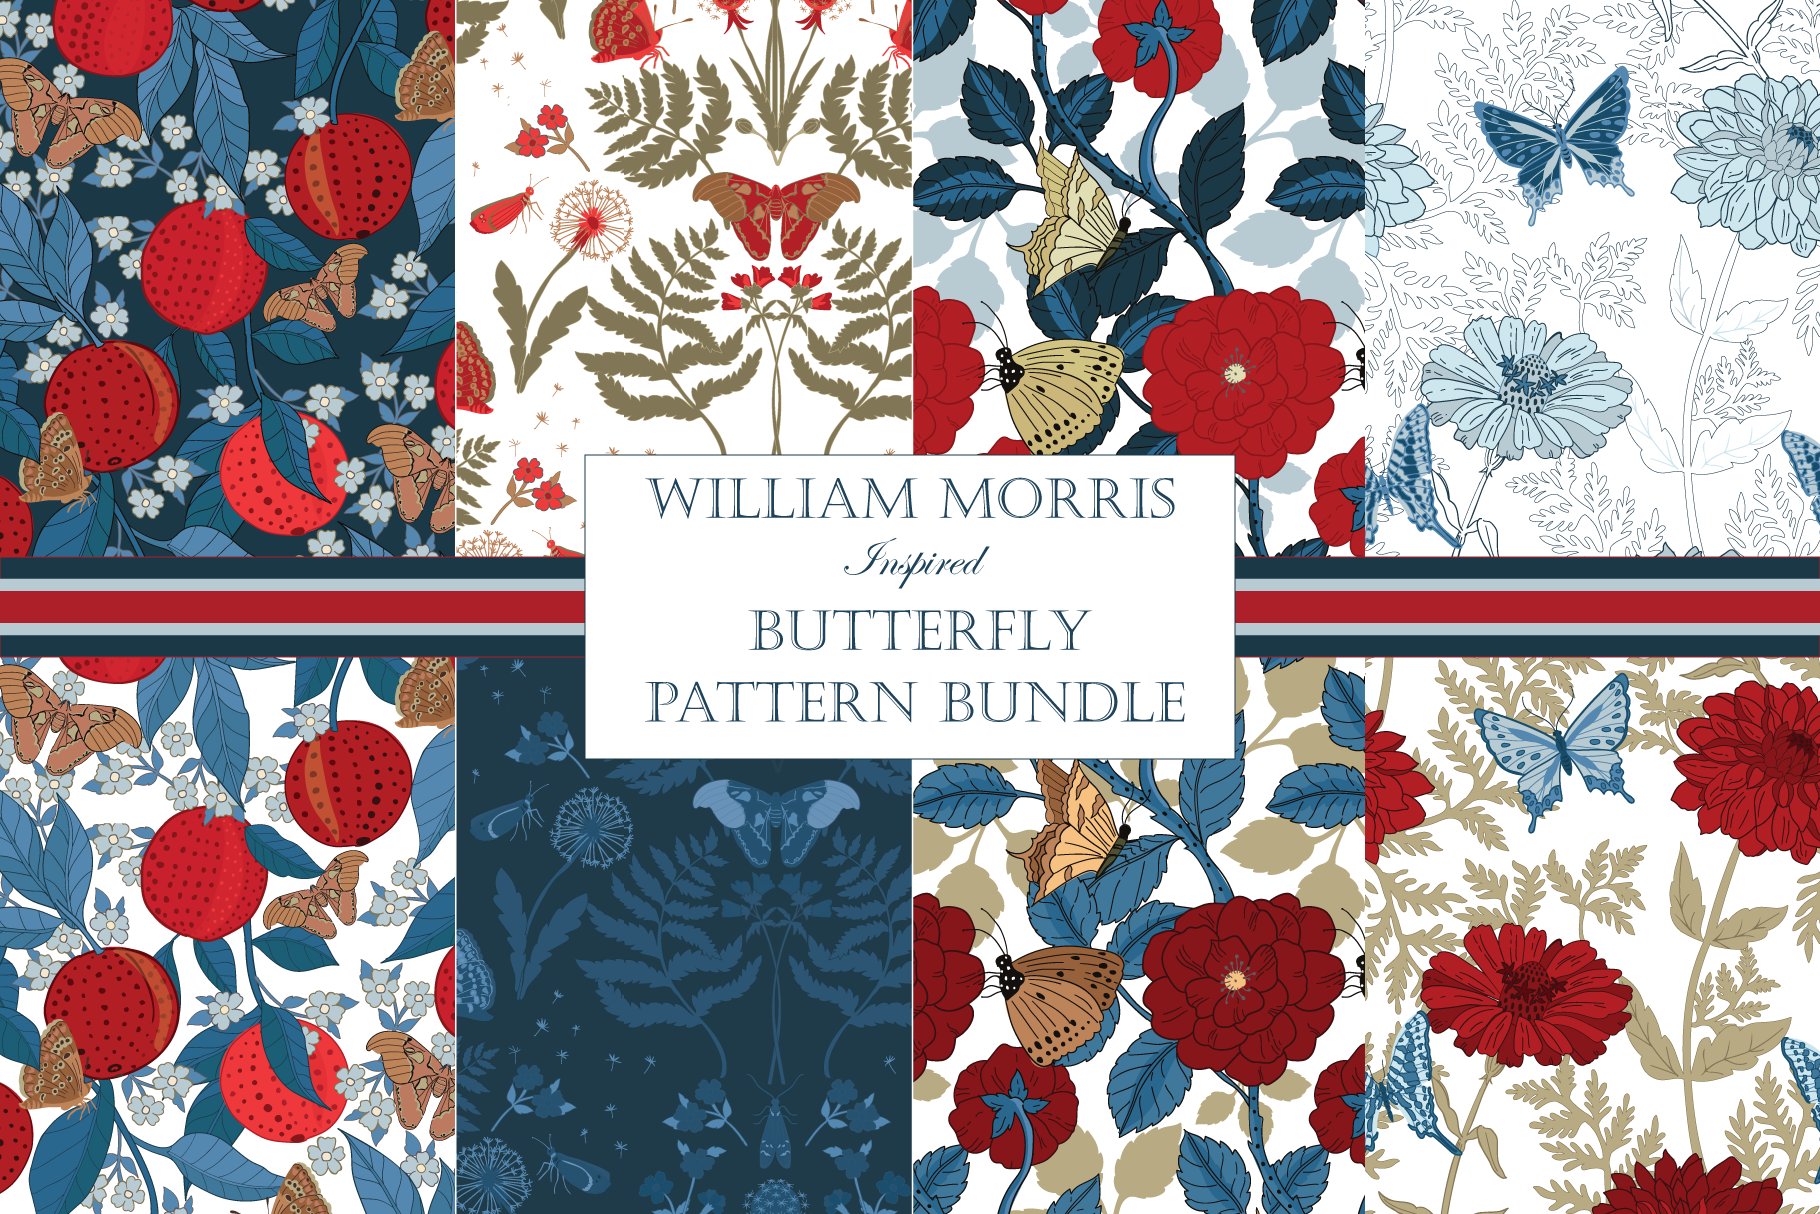 William Morris Butterfly Pattern III cover image.